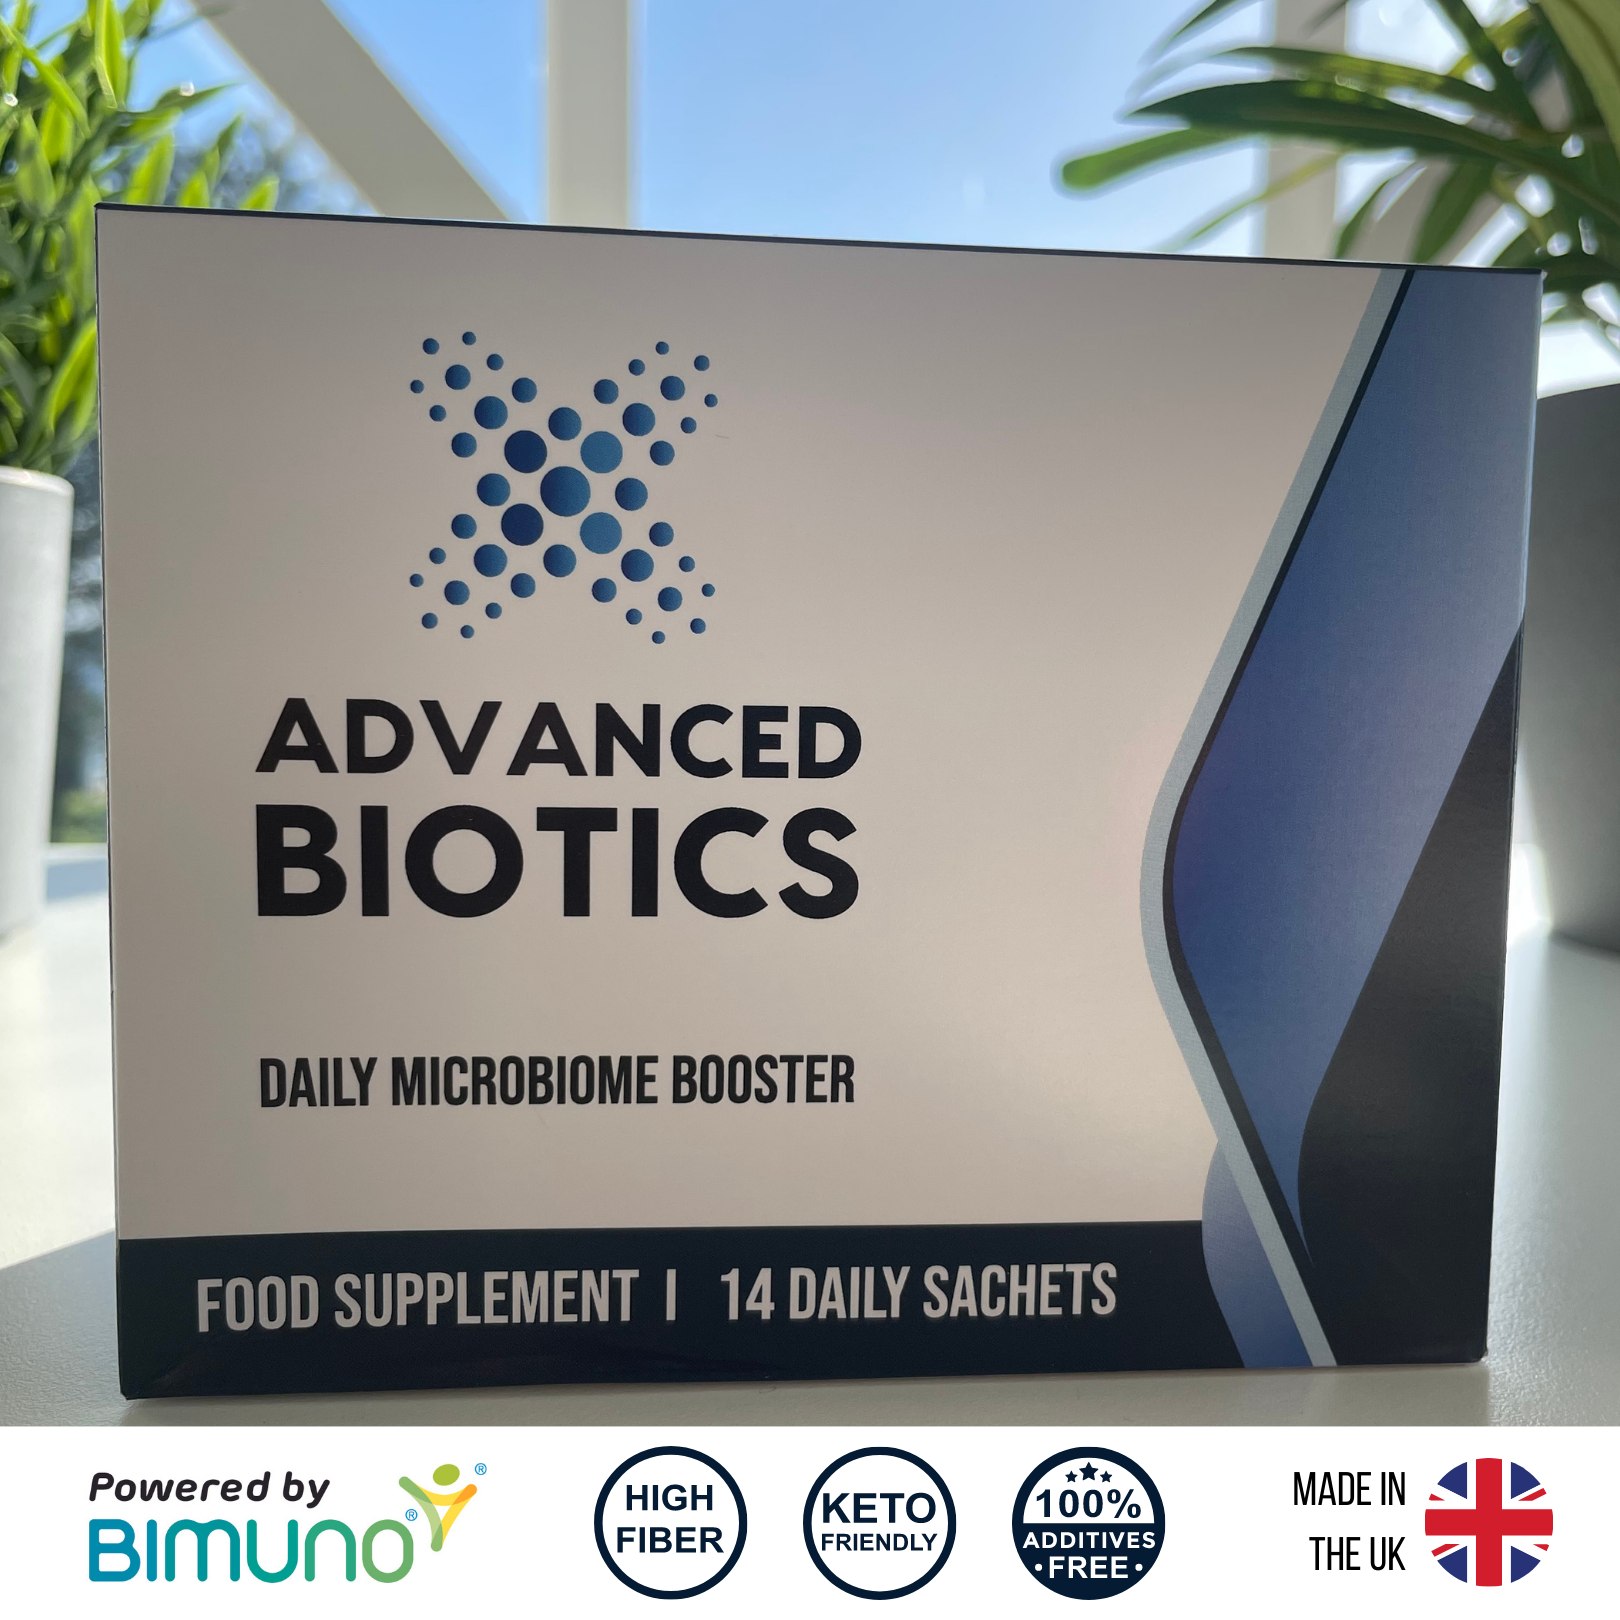 Advanced Biotics Daily Microbiome Booster supplement is powered by Bimuno and made in the UK